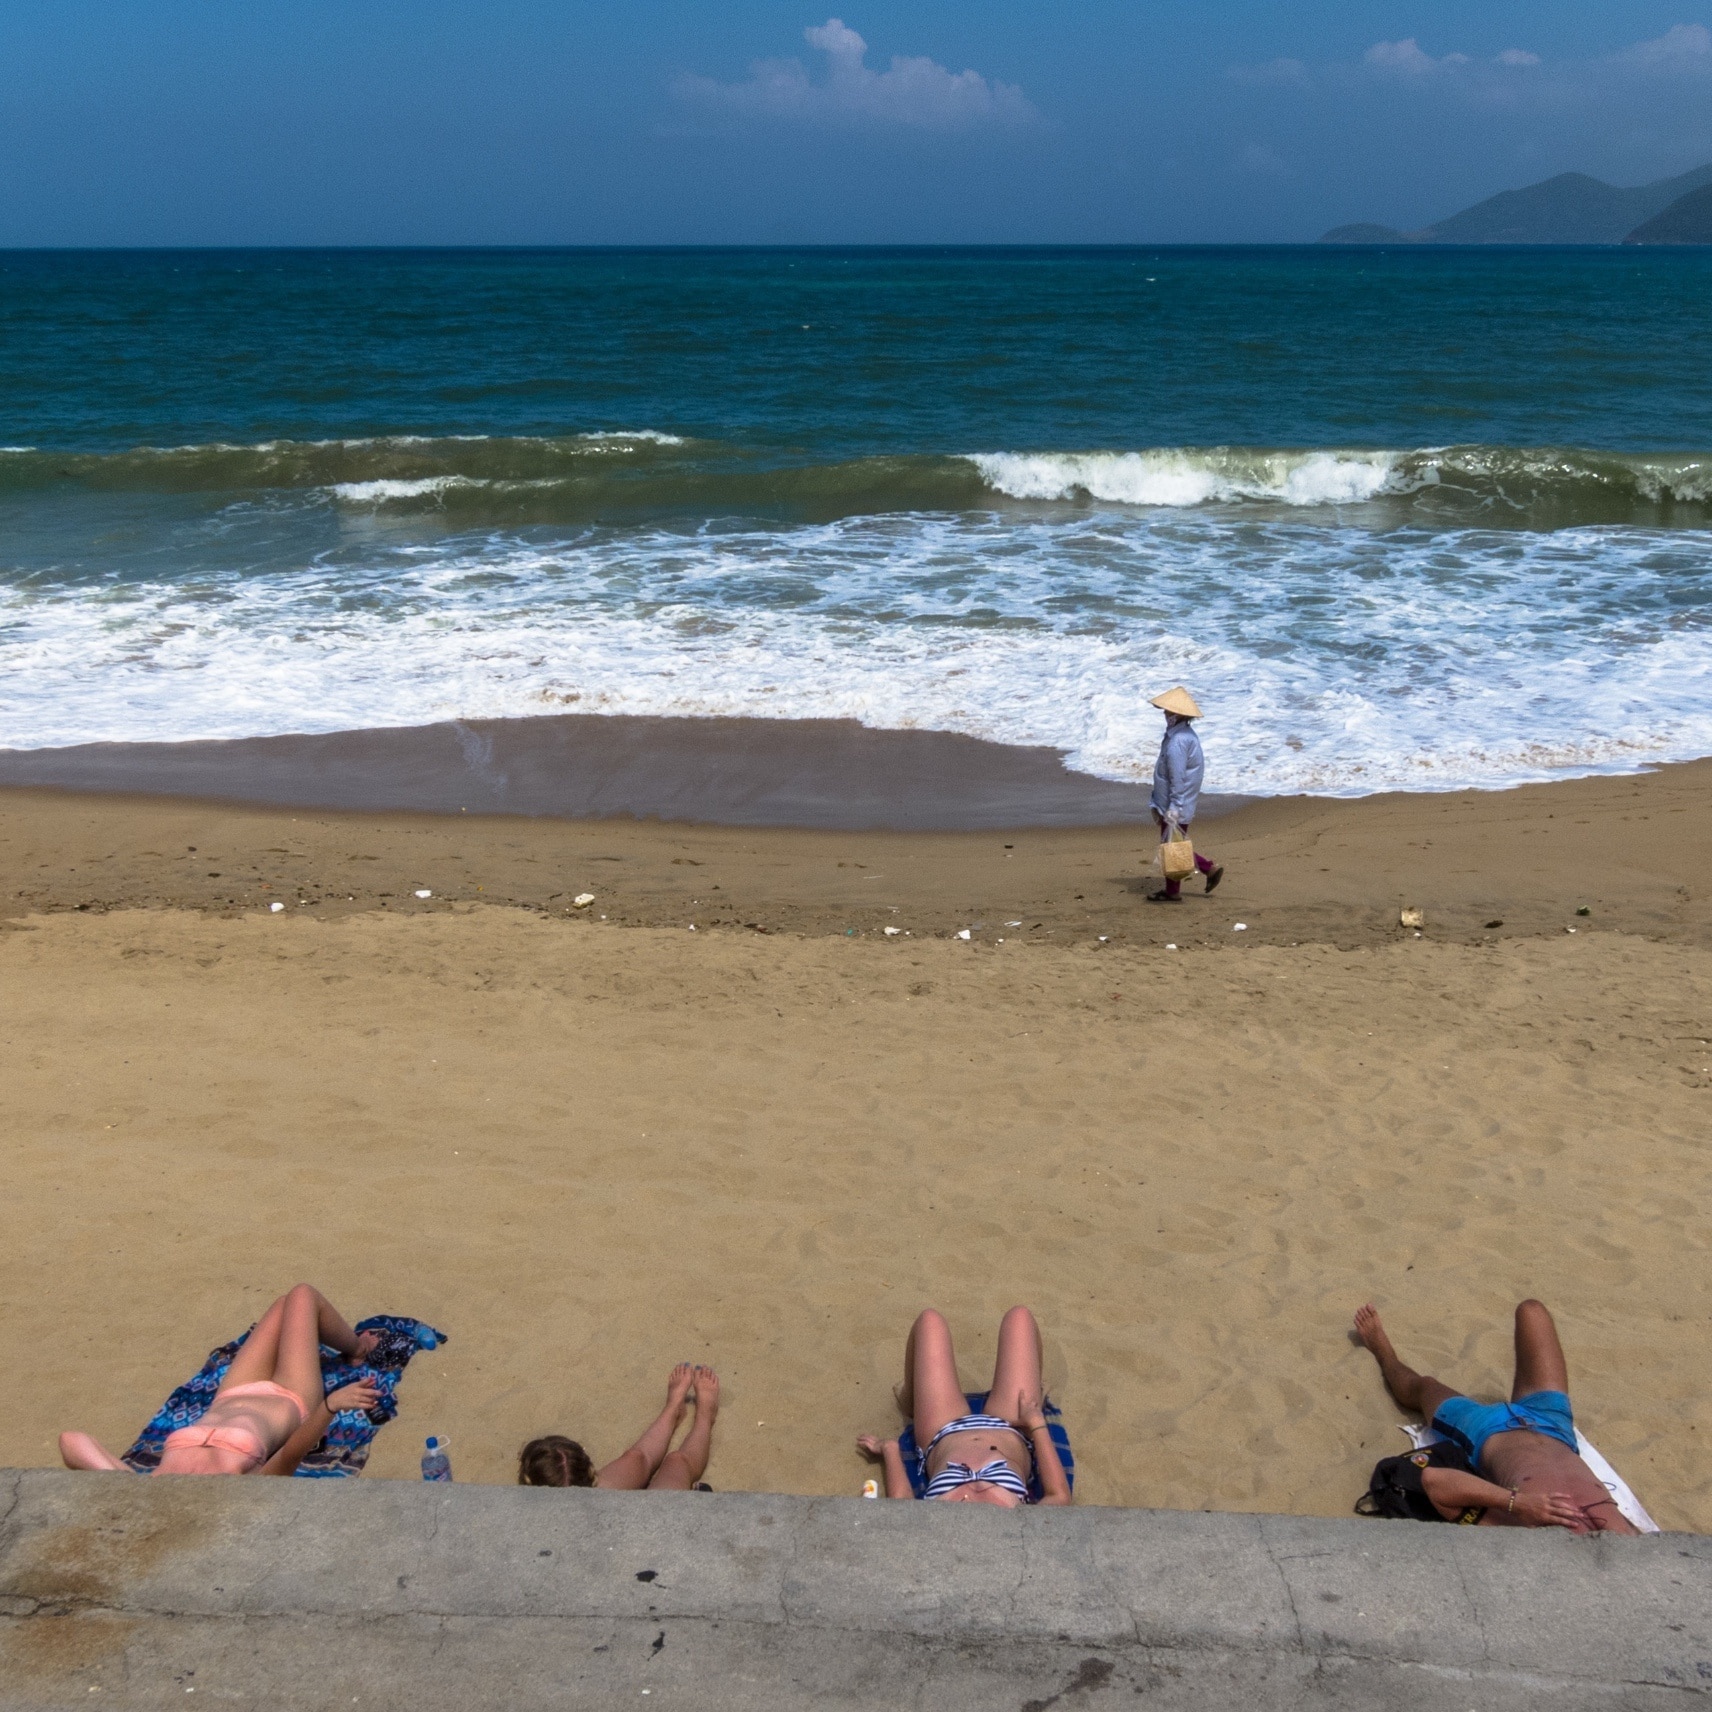 Relax by the sea in Nha Trang in Vietnam.
#sea
#vietnam